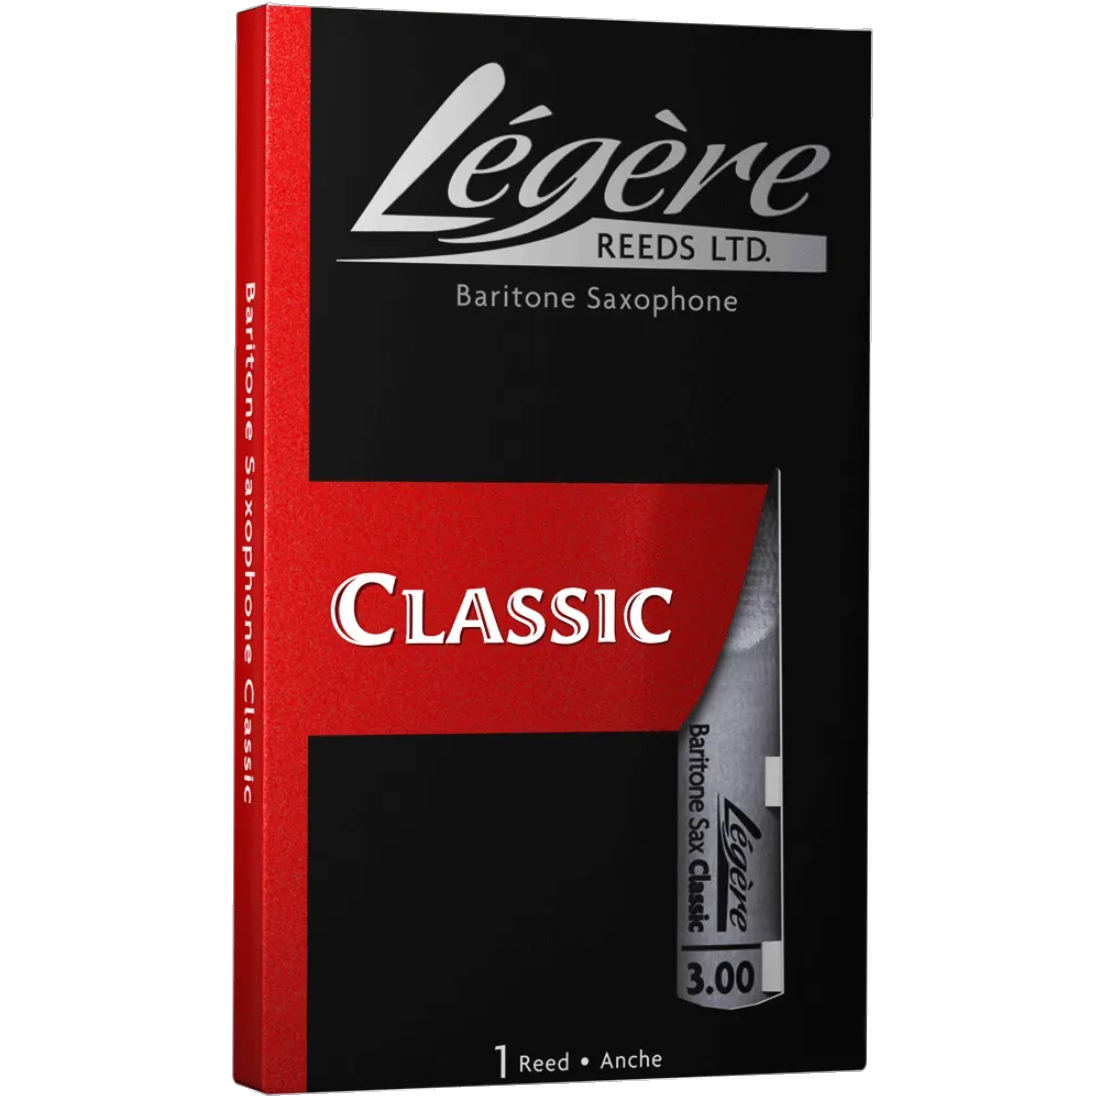 Black and red box of Legere classic synthetic bass clarinet reeds